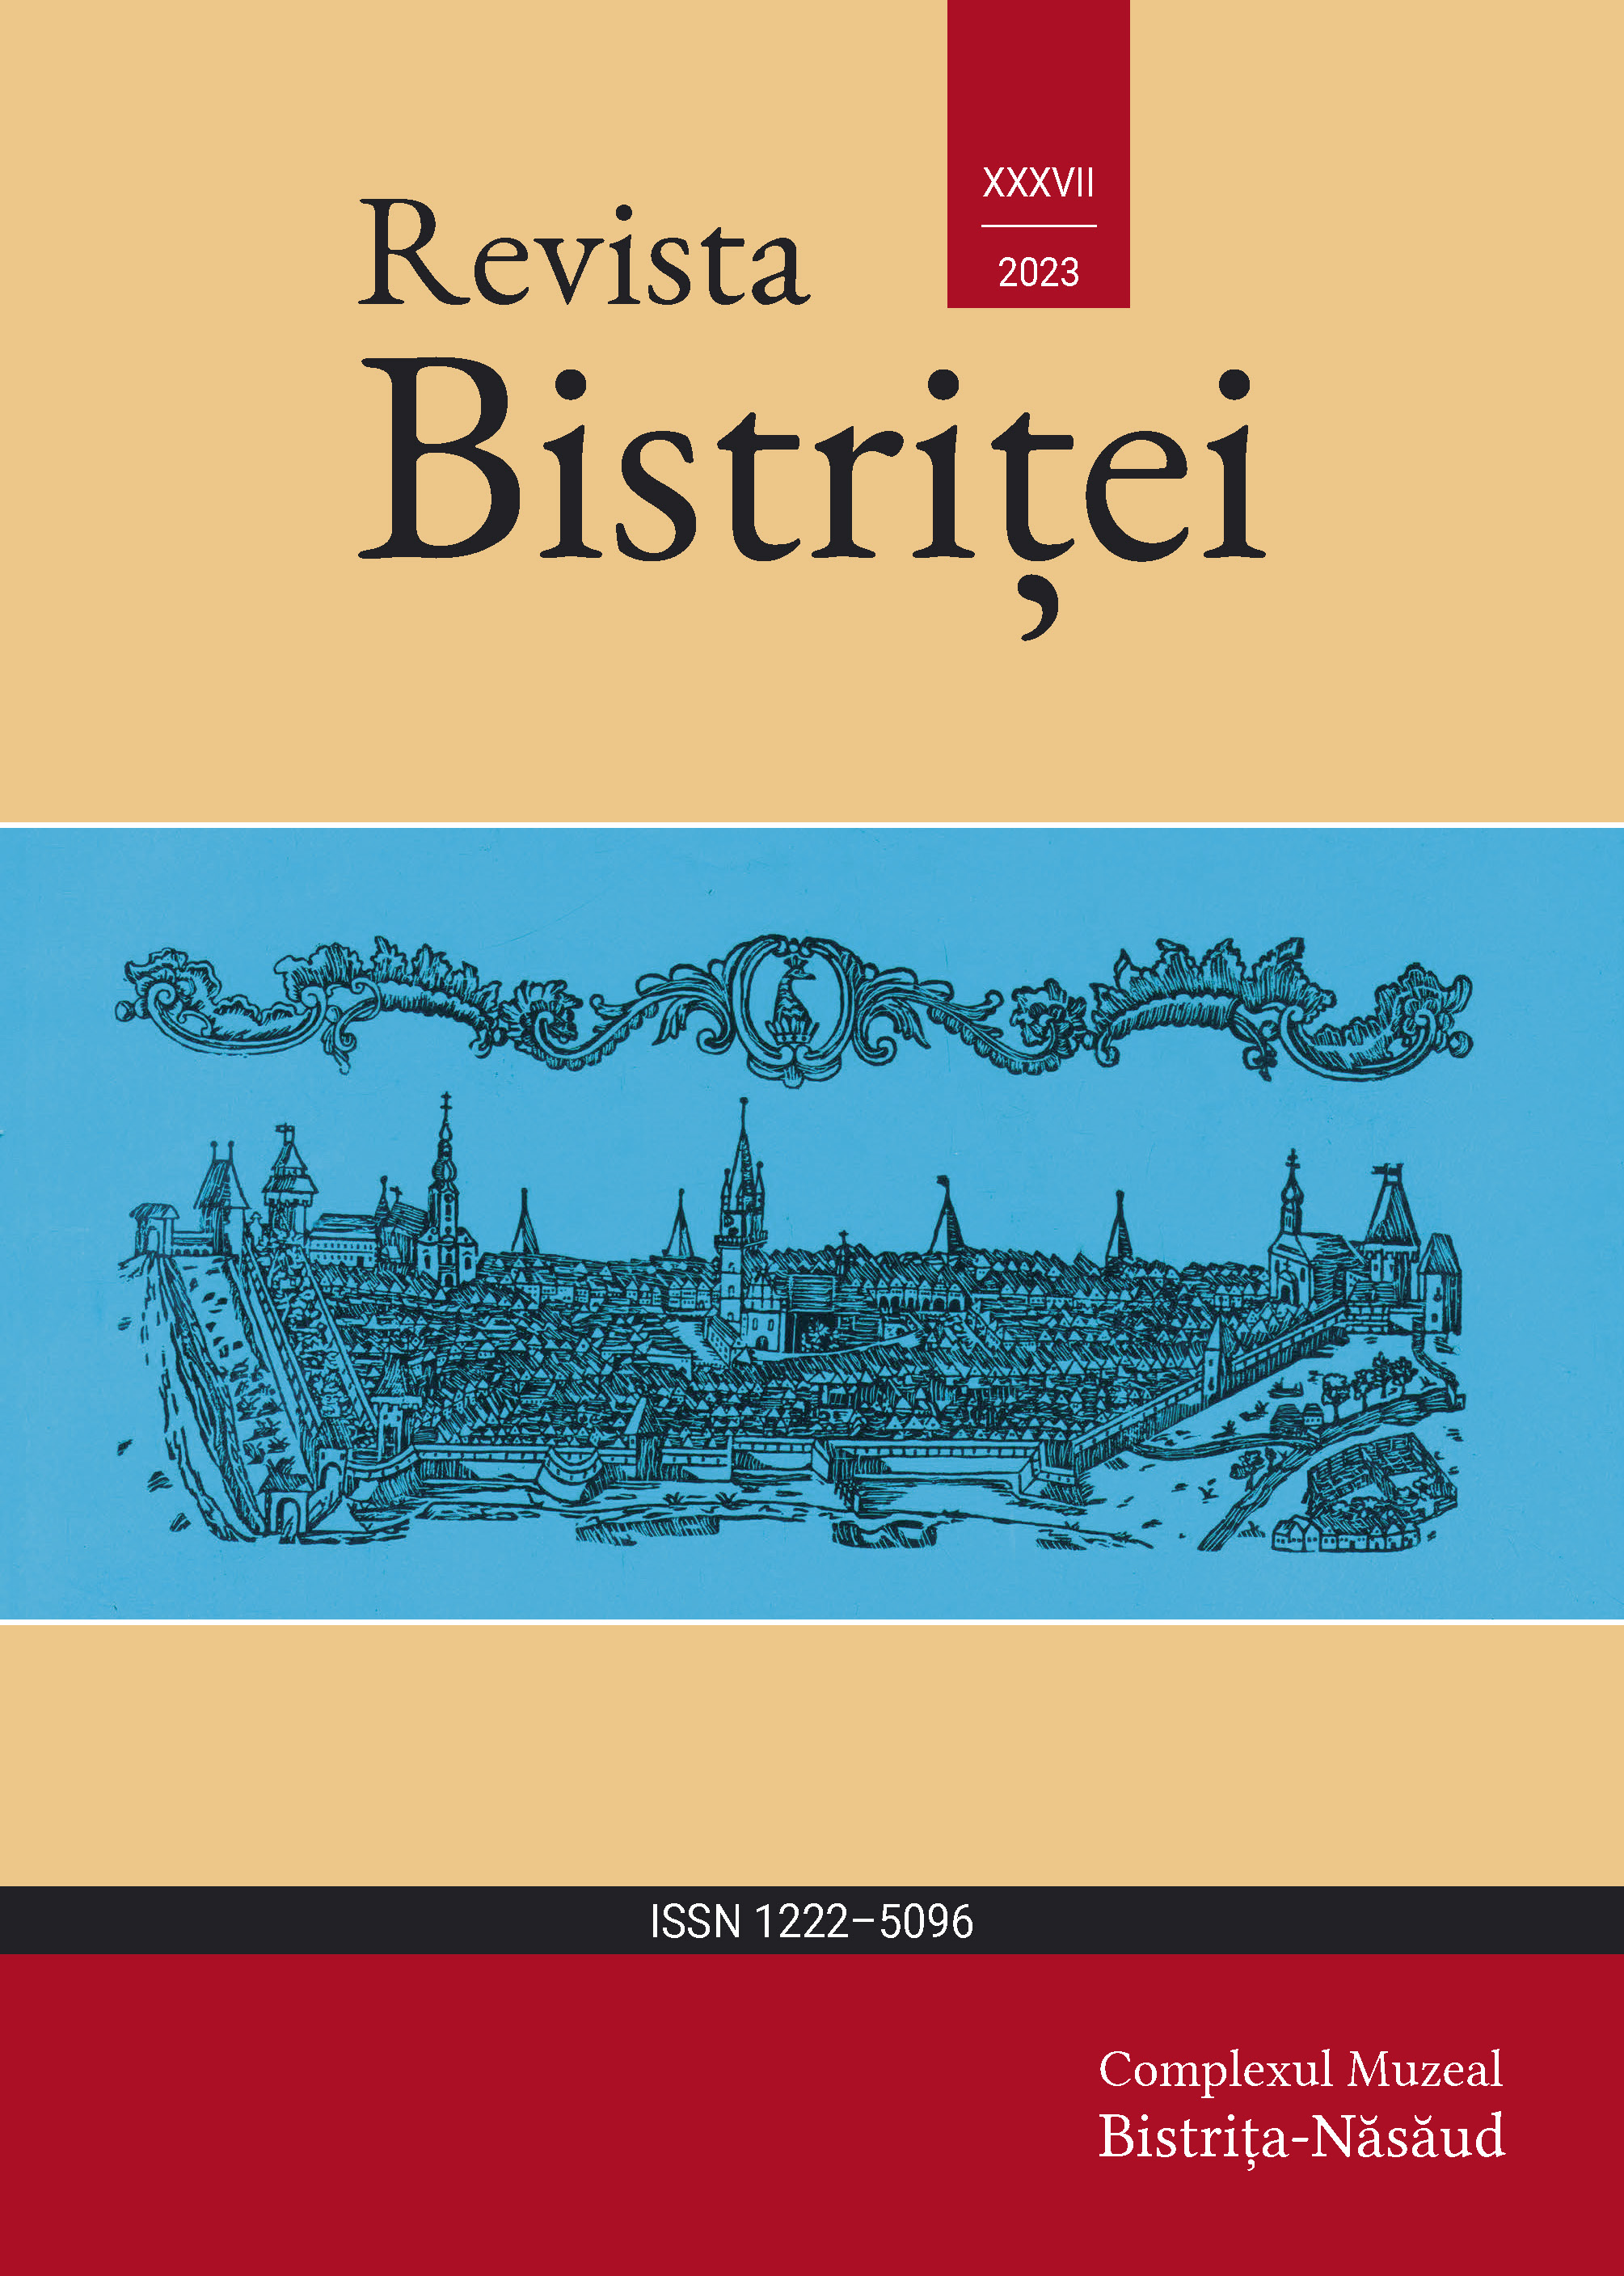 Observations Concerning the Relationship Between the Episcopal Court of Alba Iulia and the Bistrița District Around 1500 Cover Image